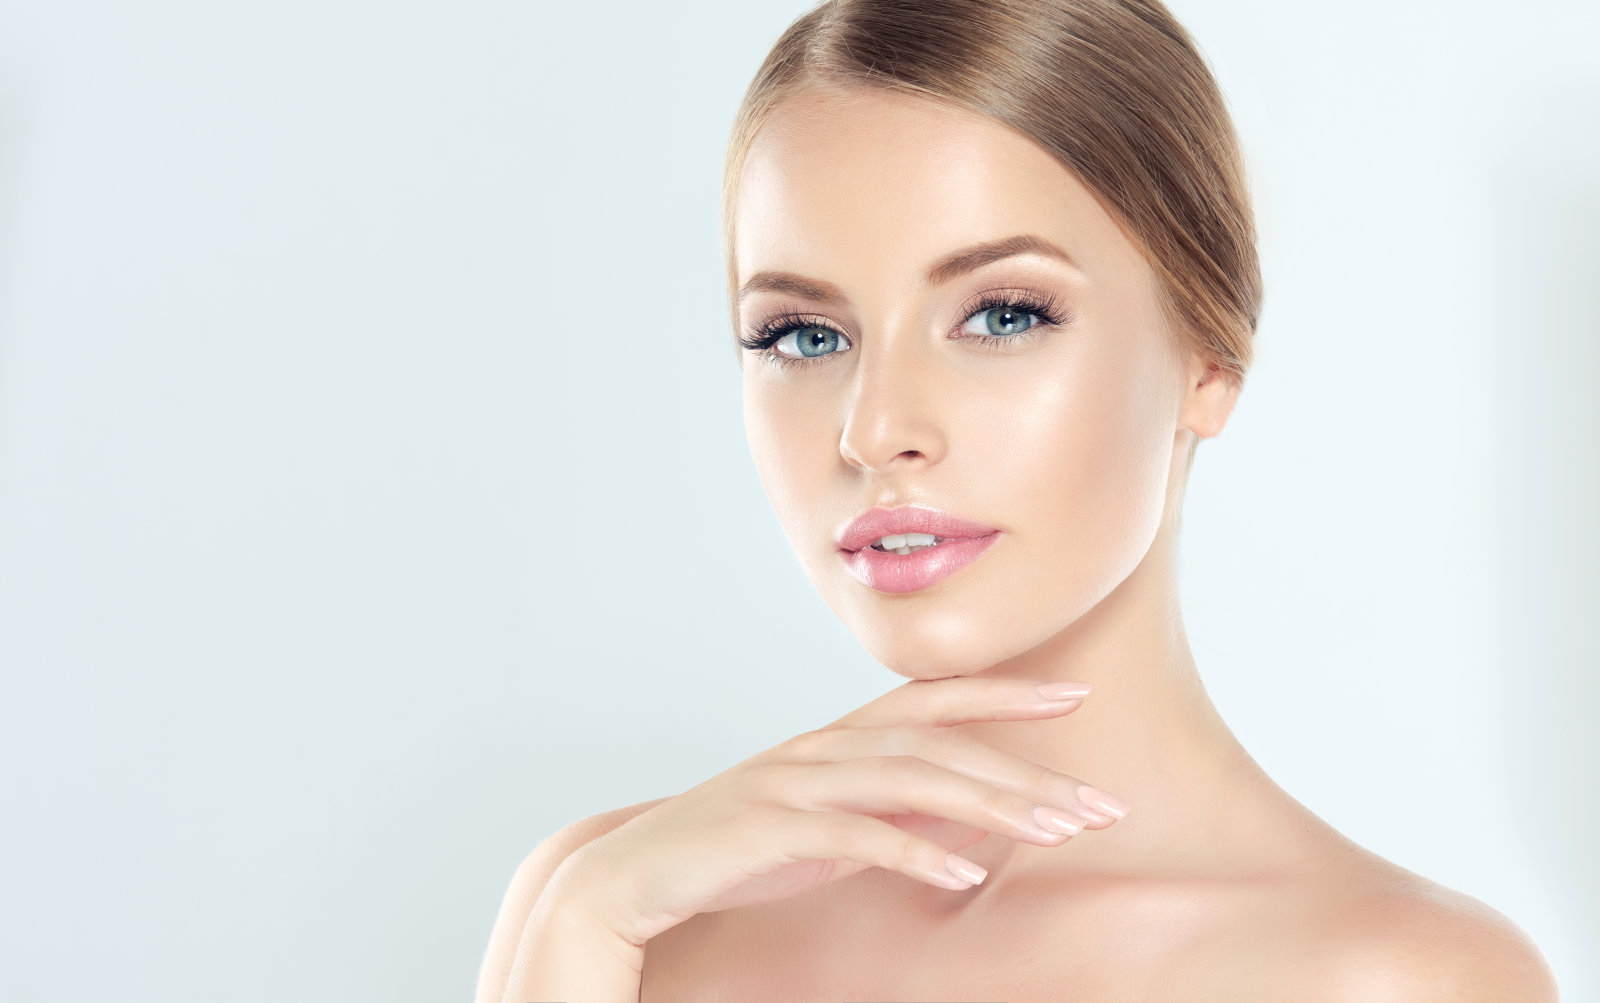 hyperbaric oxygen therapy for skin rejuvenation